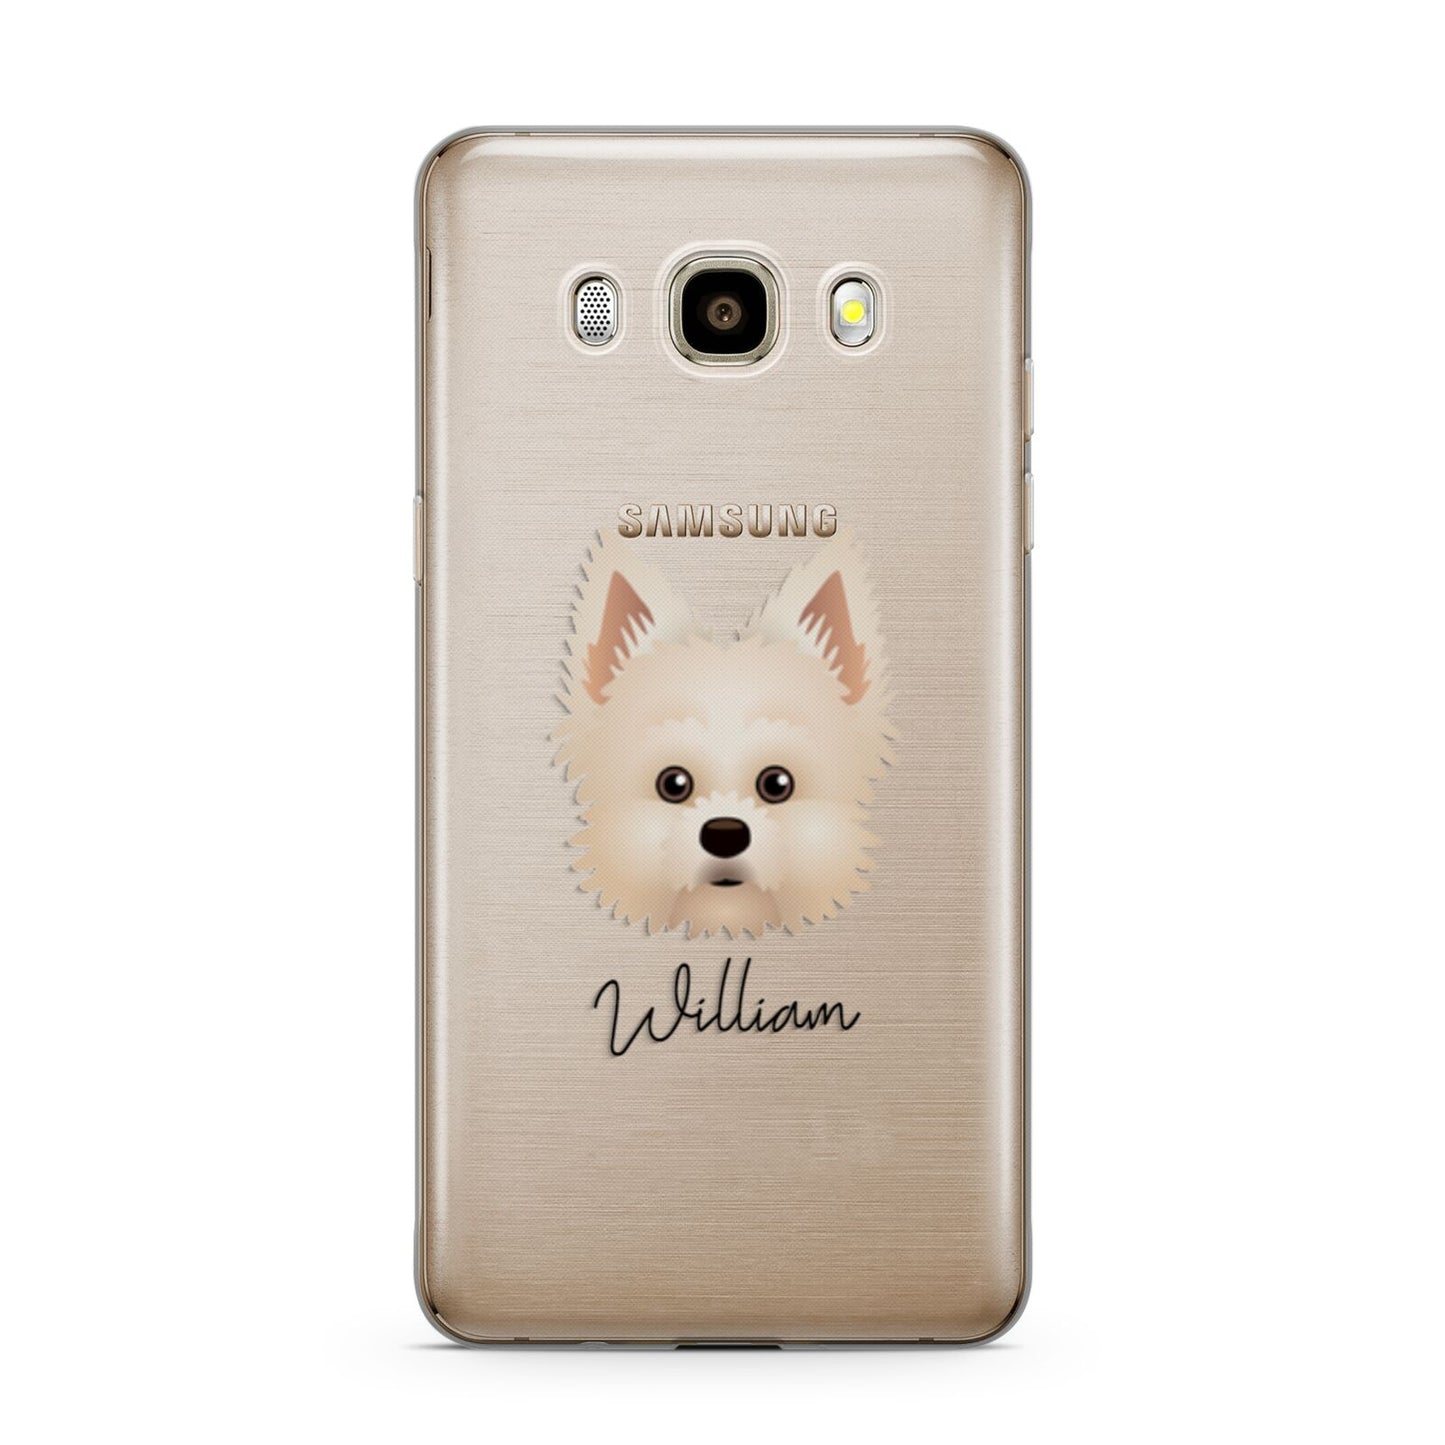 Maltipom Personalised Samsung Galaxy J7 2016 Case on gold phone